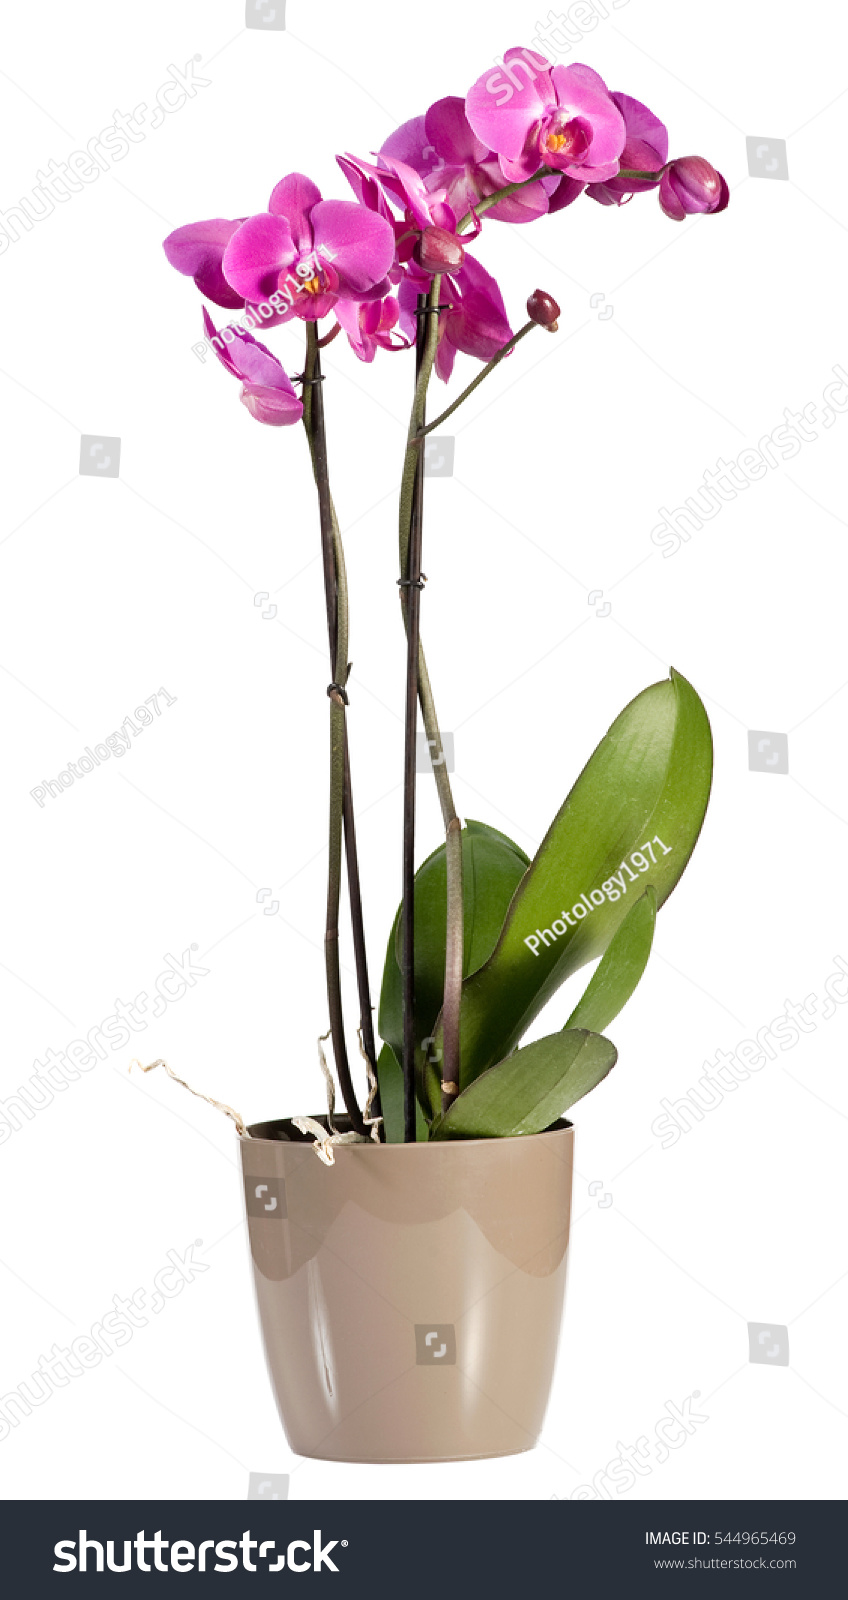 Delicate long stemmed spray of magenta pink phalaenopsis orchids growing in a pot for indoor decor, over a white background #544965469